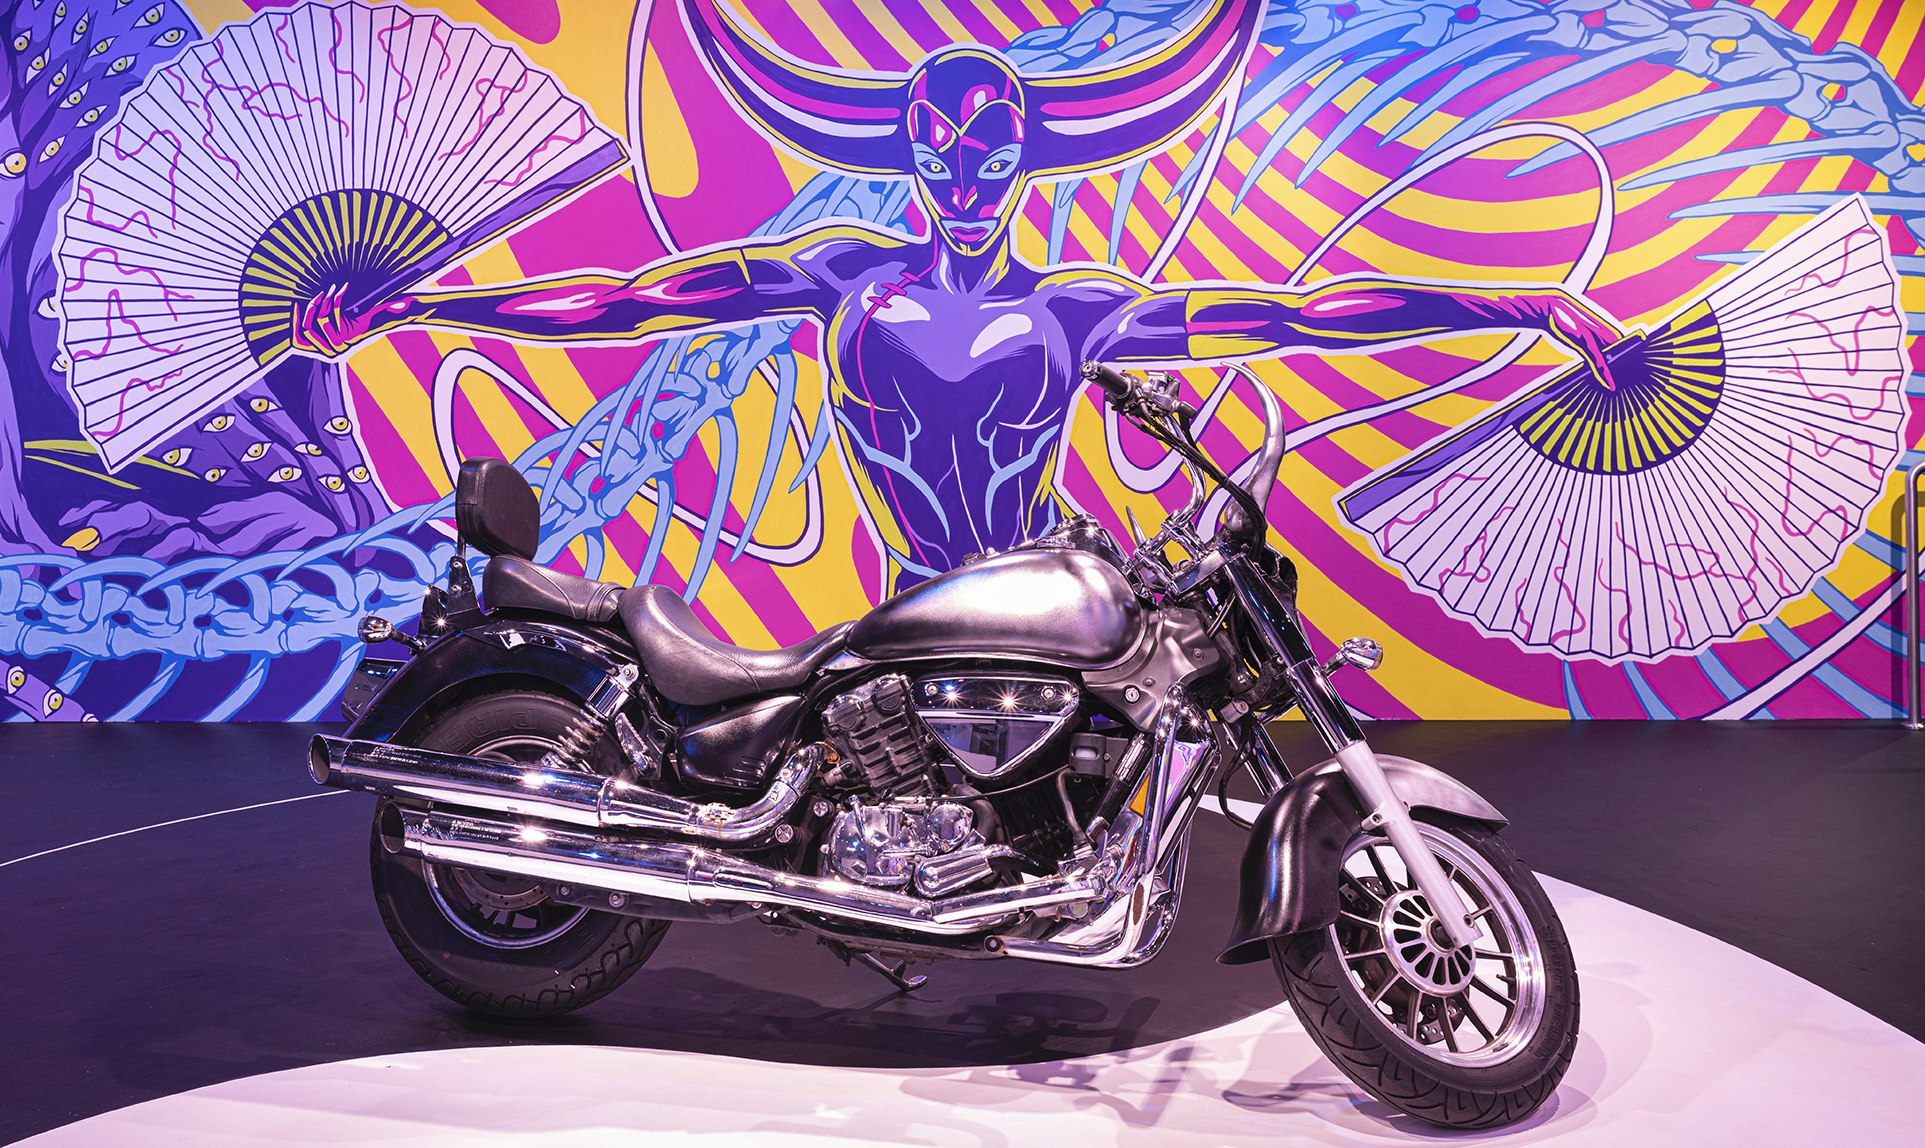 A chrome motorbike is parked in front of a mural of a feminised figure holding her arms out with an opened paper fan in each hand. Two large purple and pink ox horns protrude from her head, while she looks straight ahead with blue ringed eyes and green pupils. Behind her weaves a blue dragon's spine and a series of neon pink and yellow spirals.